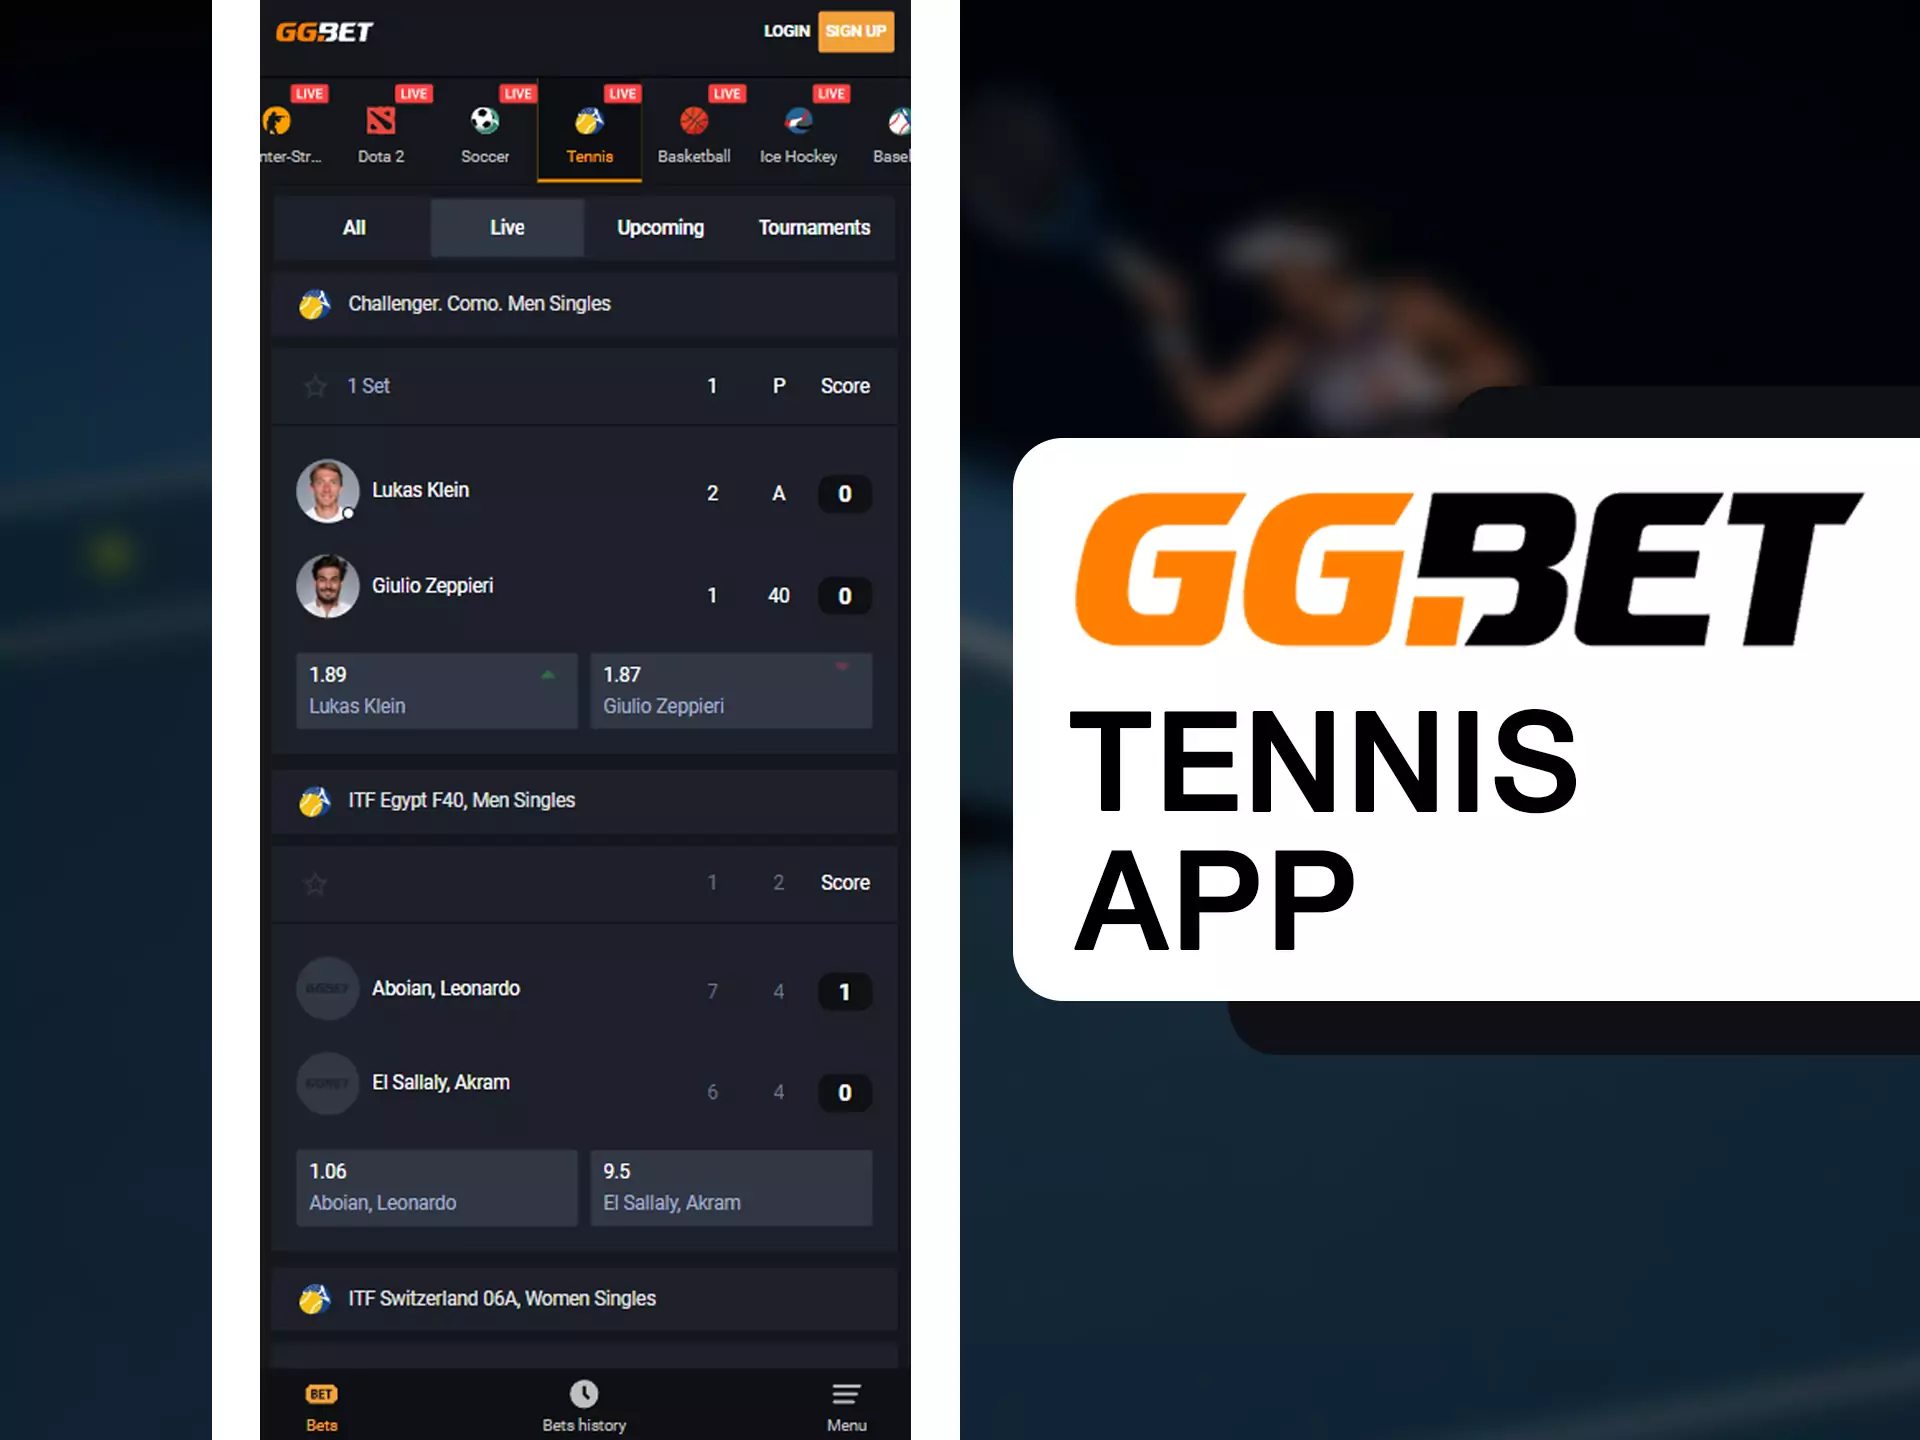 Bet on your favourite tennis player and win big prizes at GGBet.